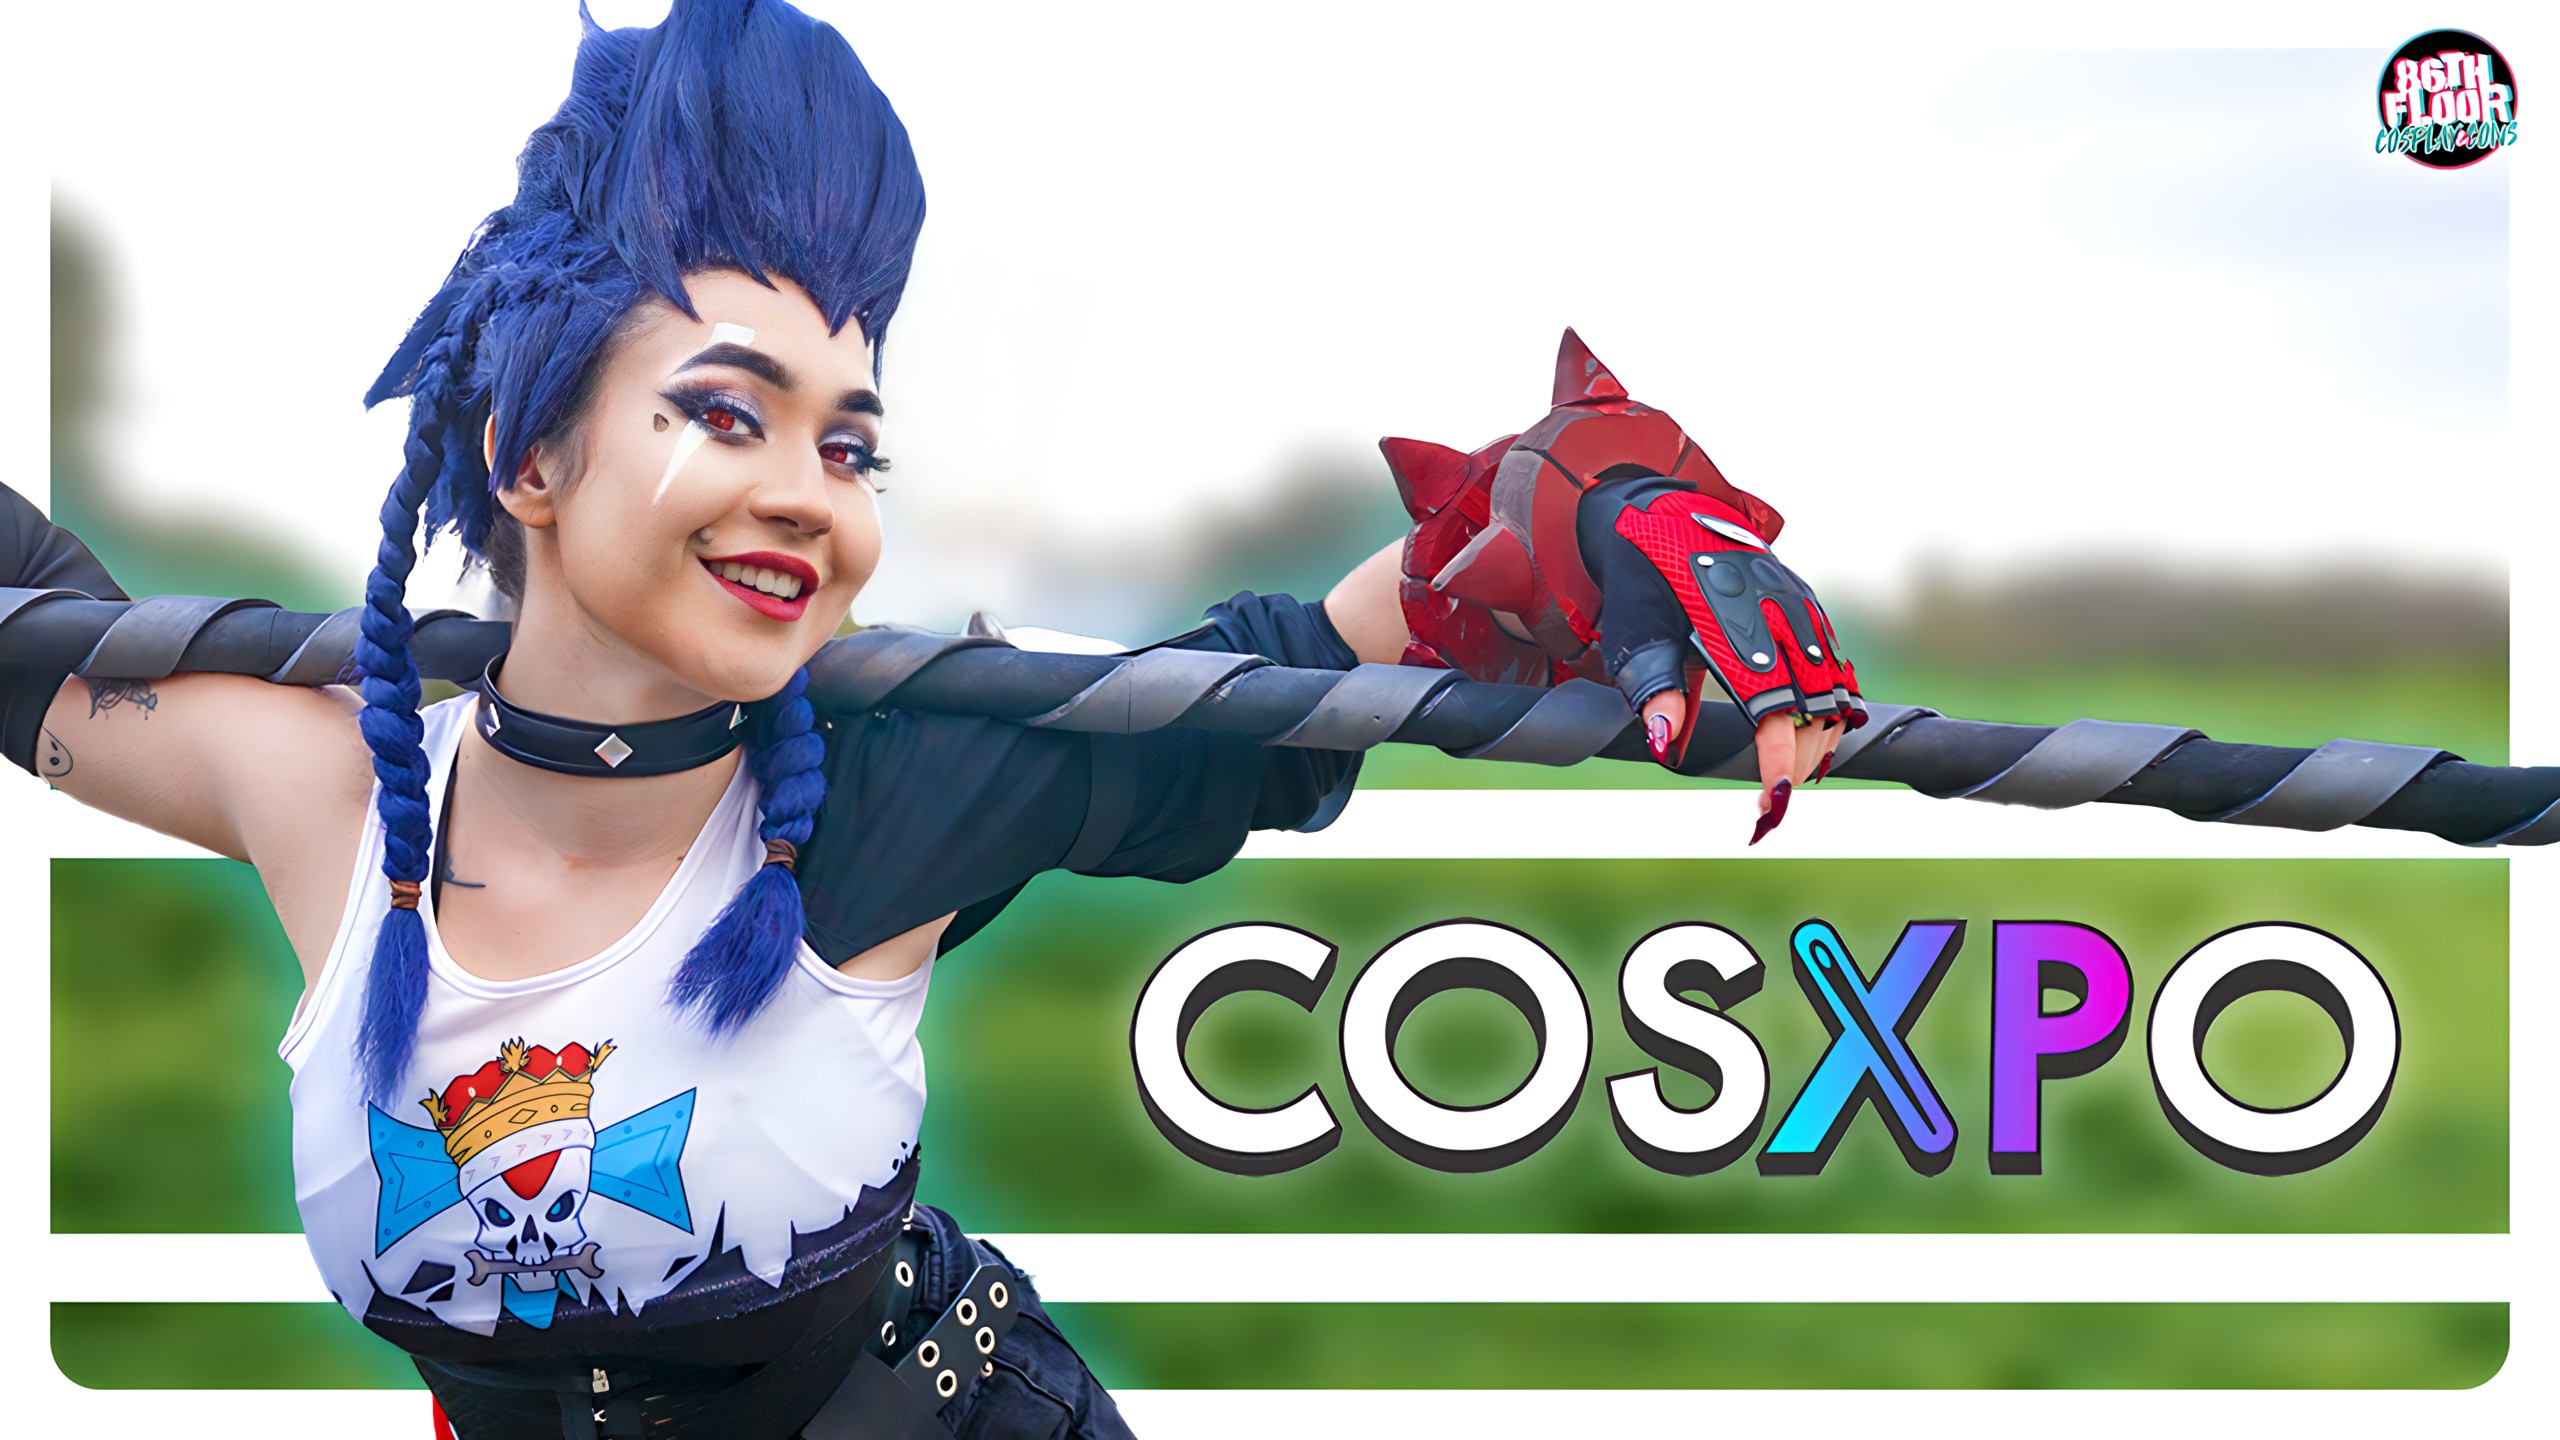 AMAZING Cosplay at COSXPO 2023 – Watch our Cosplay Music Video ft. Genshin Impact, My Hero Academia, Demon Slayer and more!